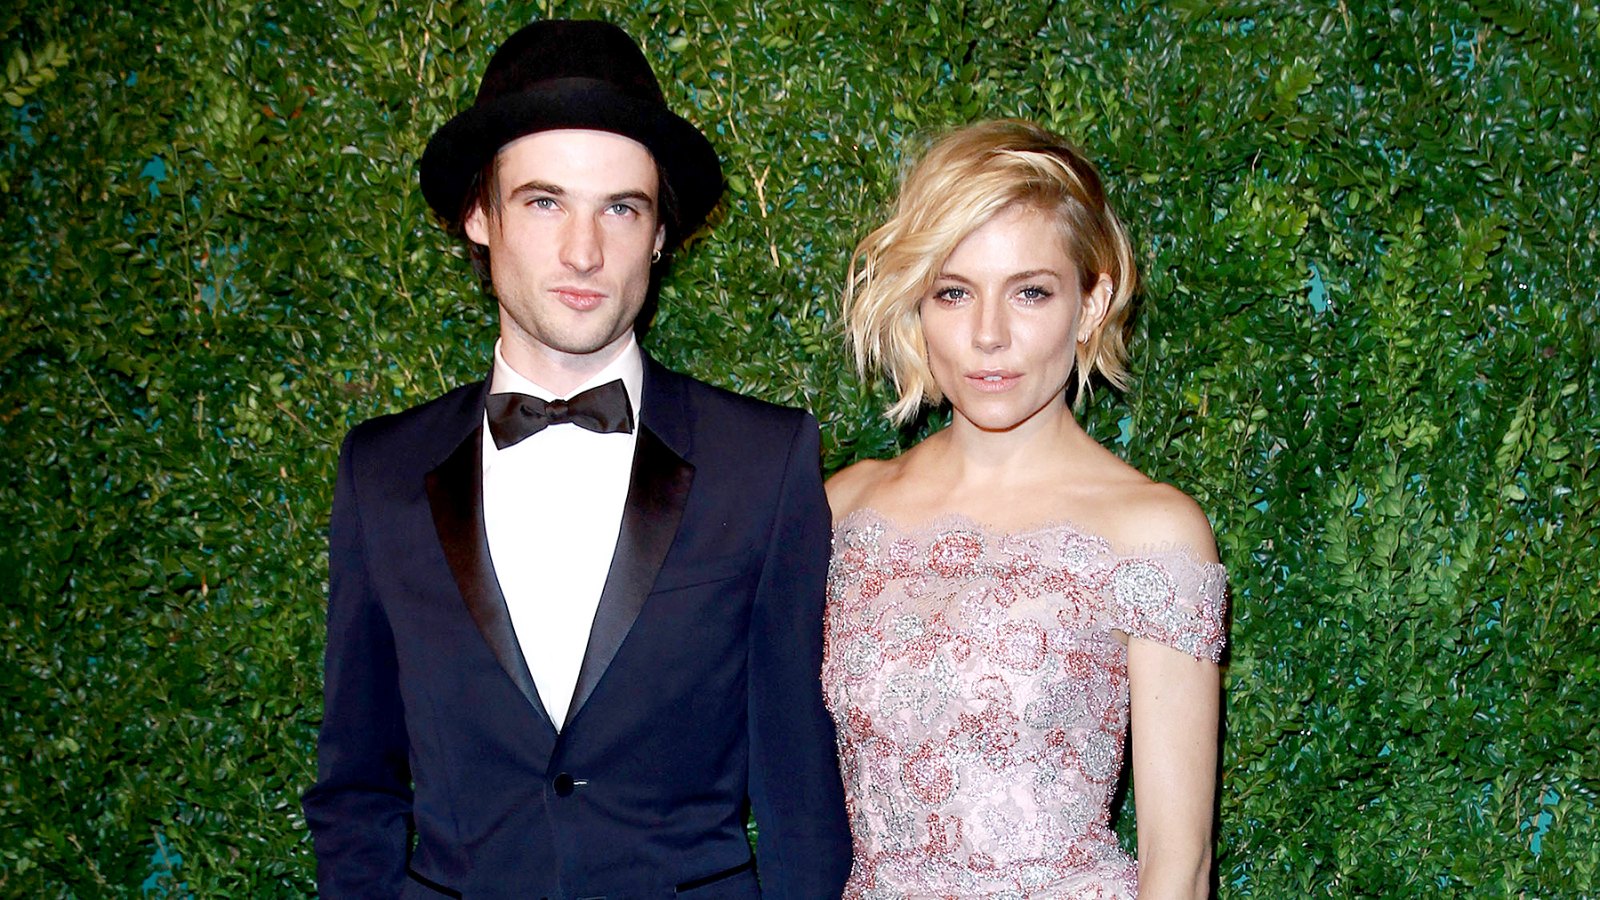 Sienna Miller and Tom Sturridge attends the 60th London Evening Standard Theatre Awards at London Palladium on November 30, 2014 in London, England.